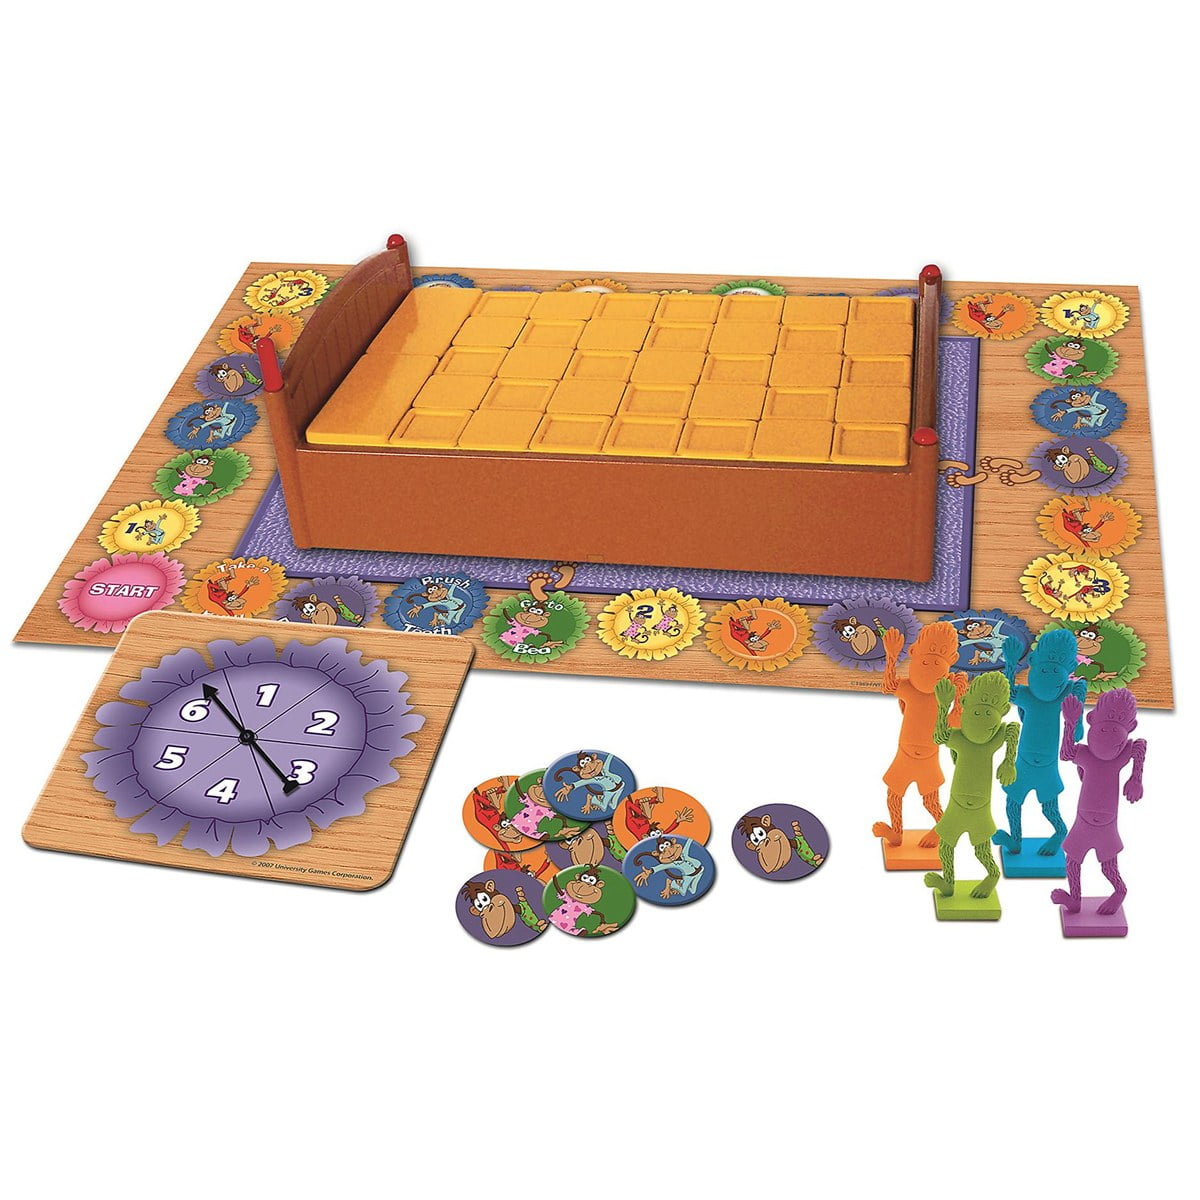 2012 University Games Five Little Monkeys Jumping on The Bed Board Game #01320 for sale online